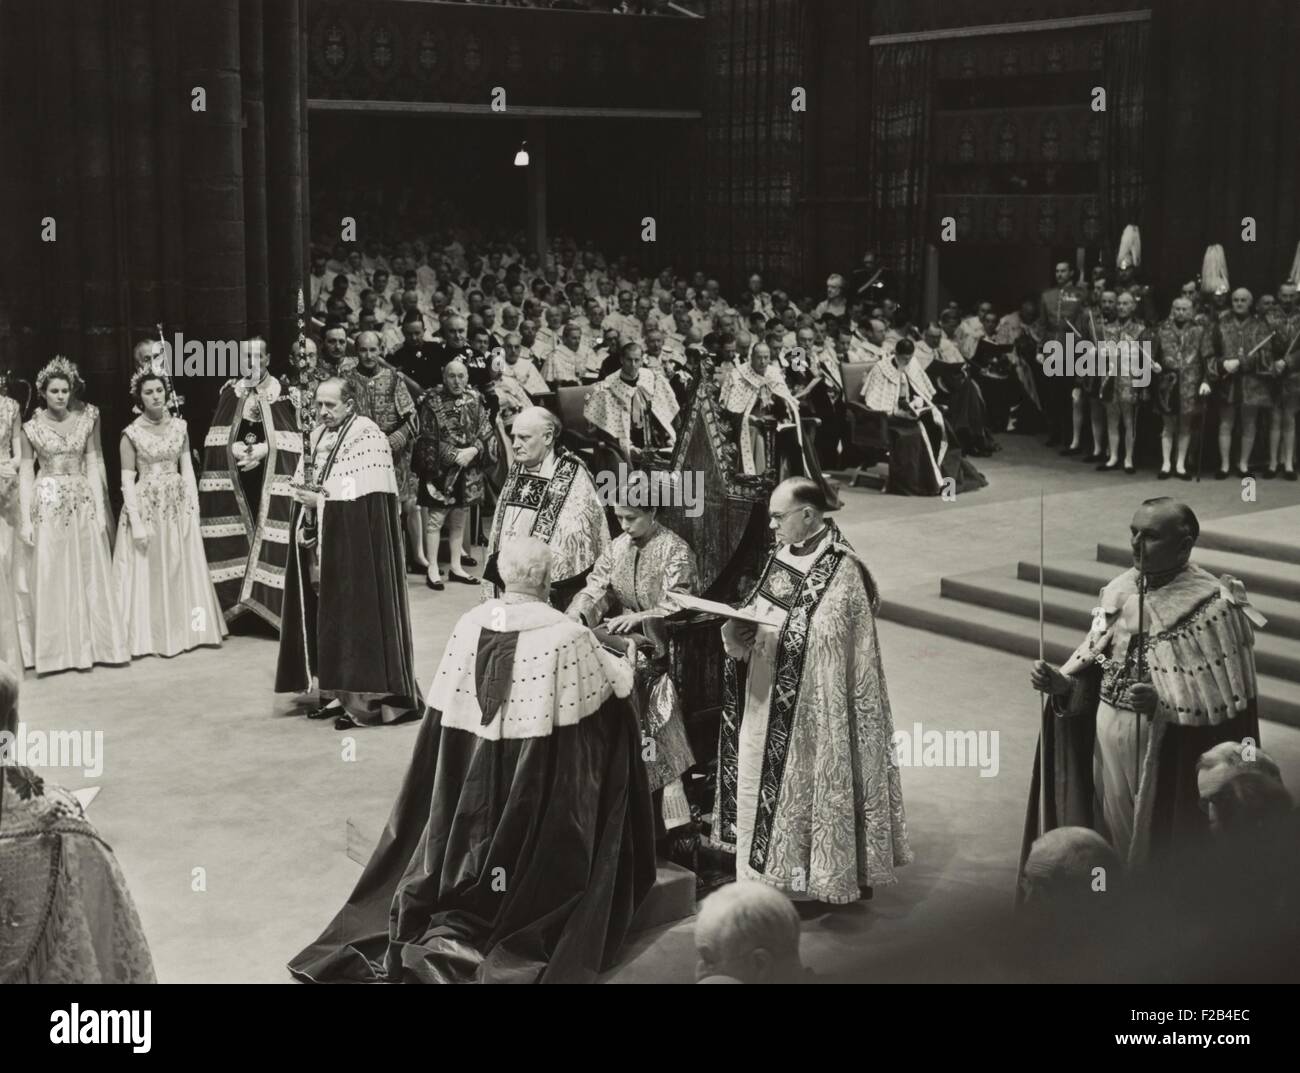 Coronation ceremony of Queen Elizabeth II, June 2, 1953. She is receiving the Spurs of Chivalry from the Lord Great Chamberlain. - (BSLOC 2015 1 46) Stock Photo